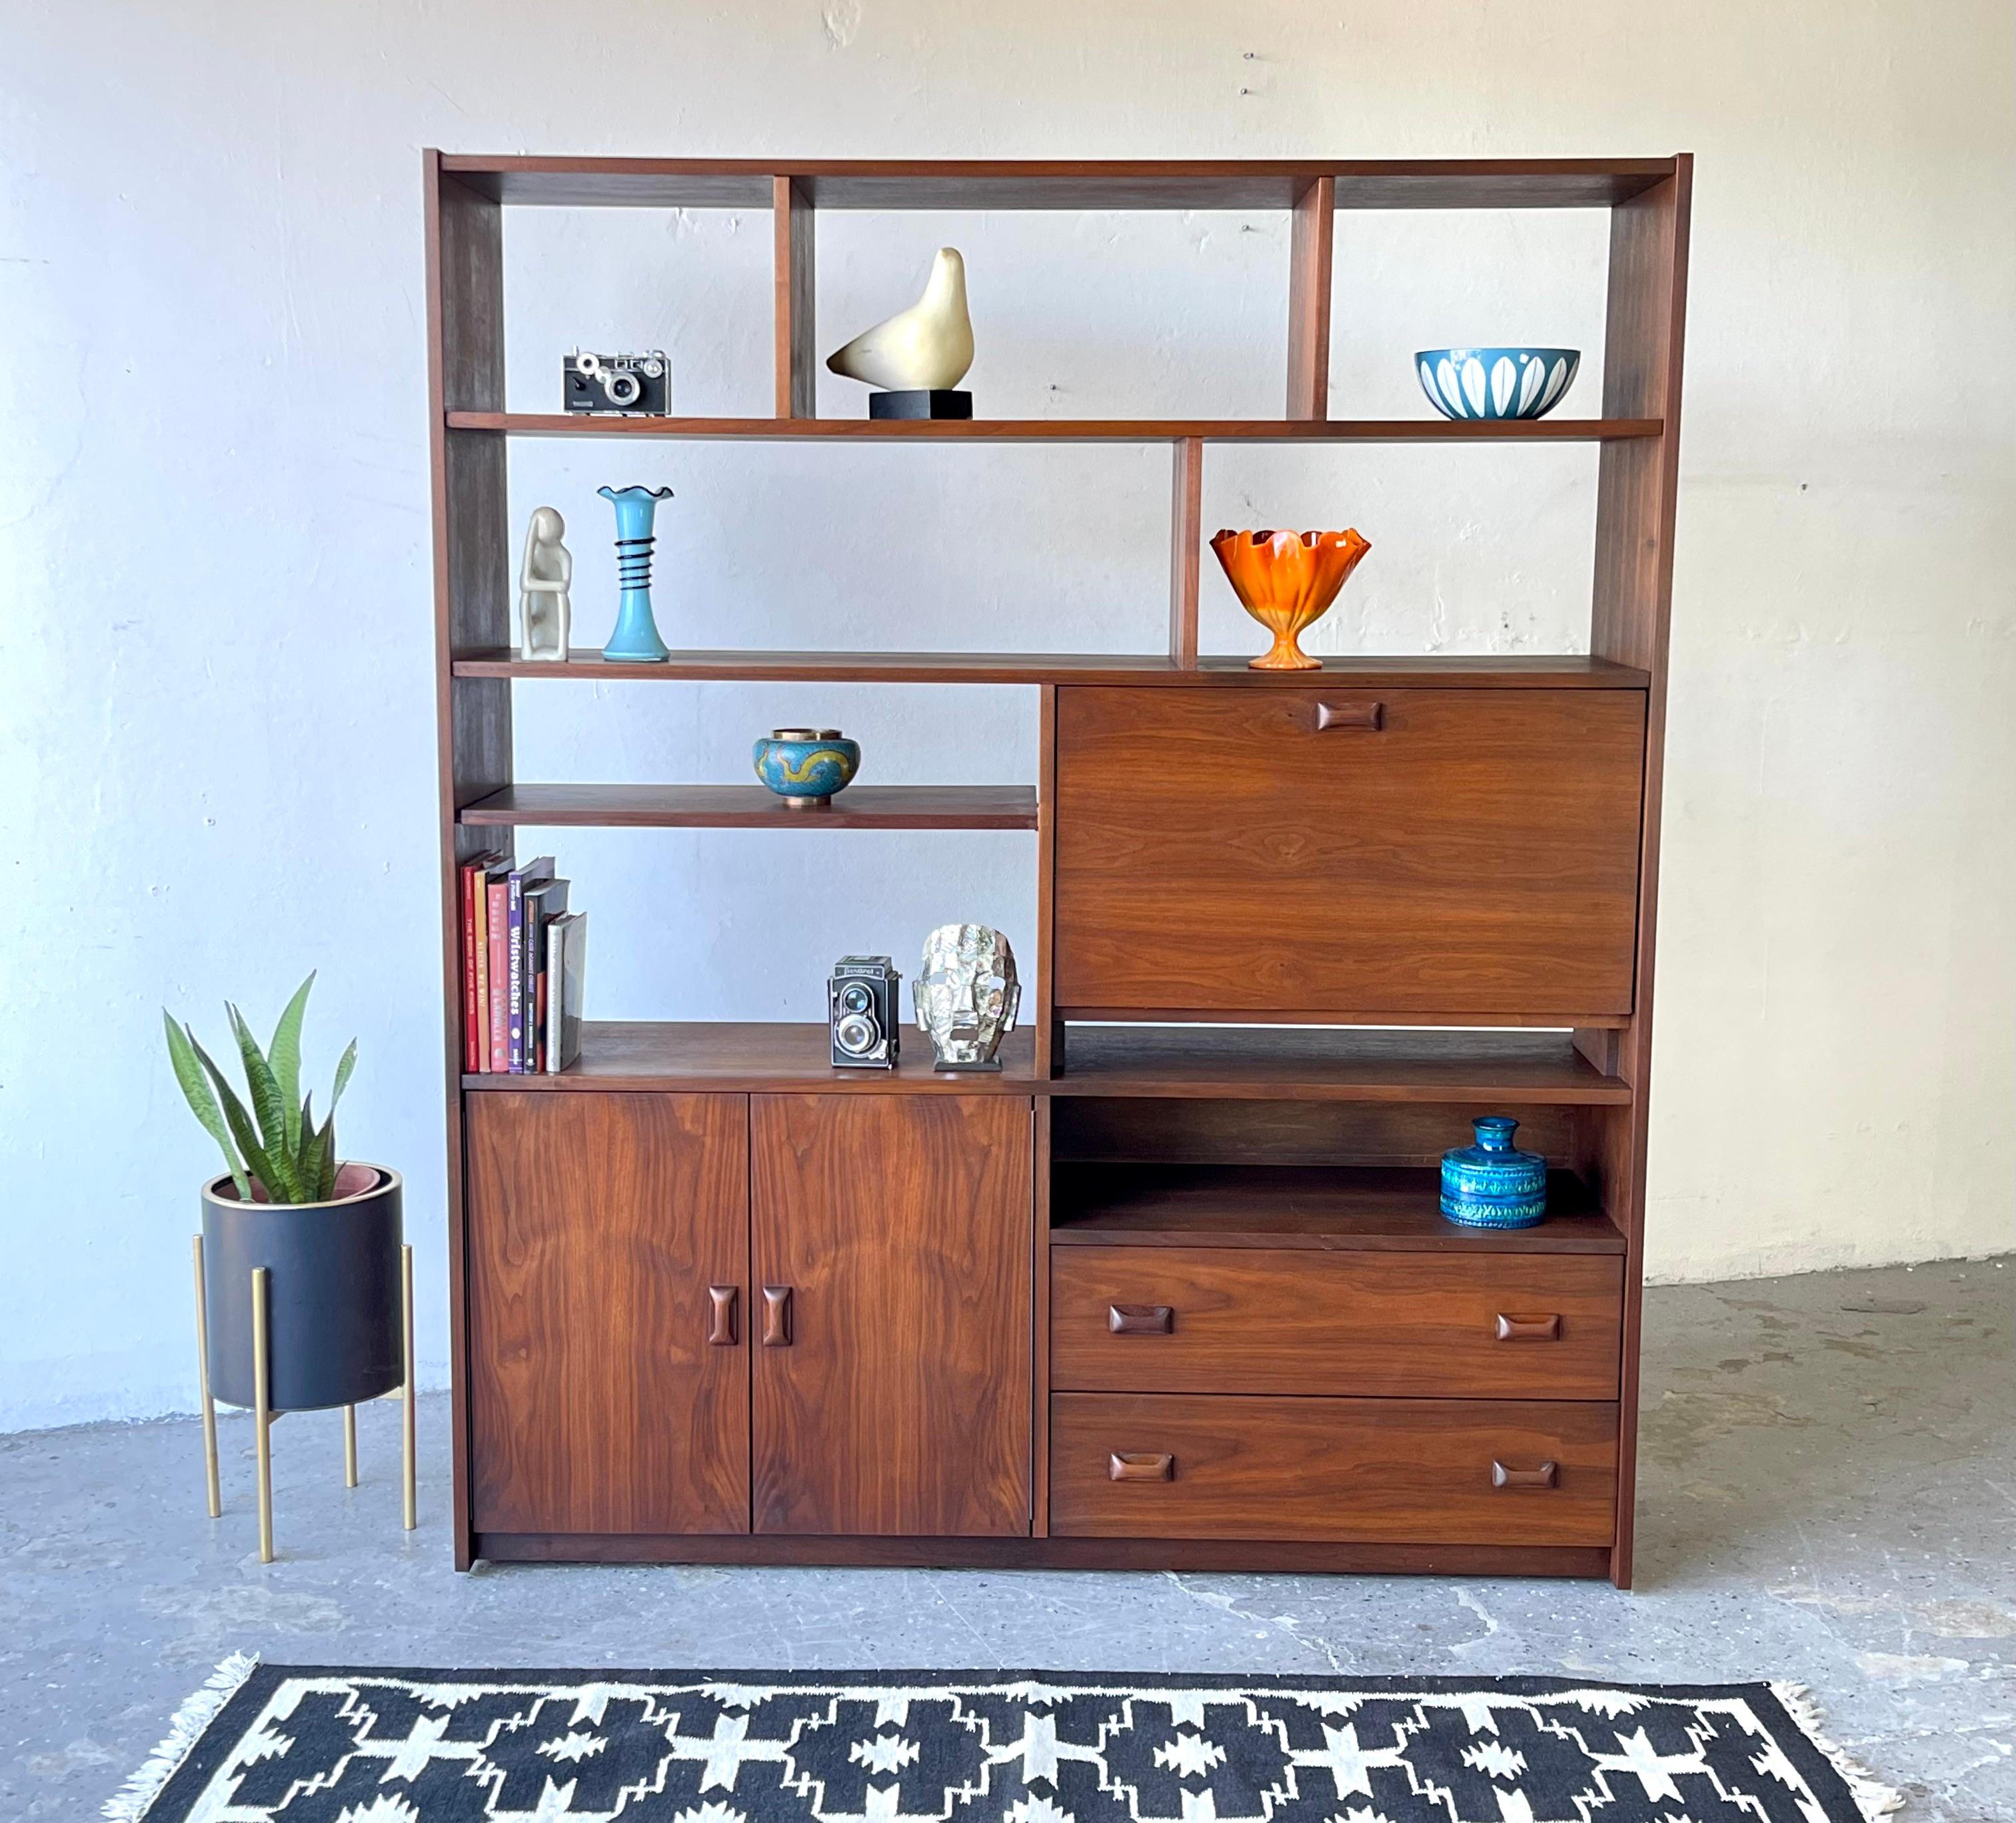 This is a big, beautiful, mid-century room divider in rich, warm walnut. It is finished on both sides, so it can be used against the wall as a bookcase or in the middle of the room as a divider. The door on the top compartment flips down on a piano